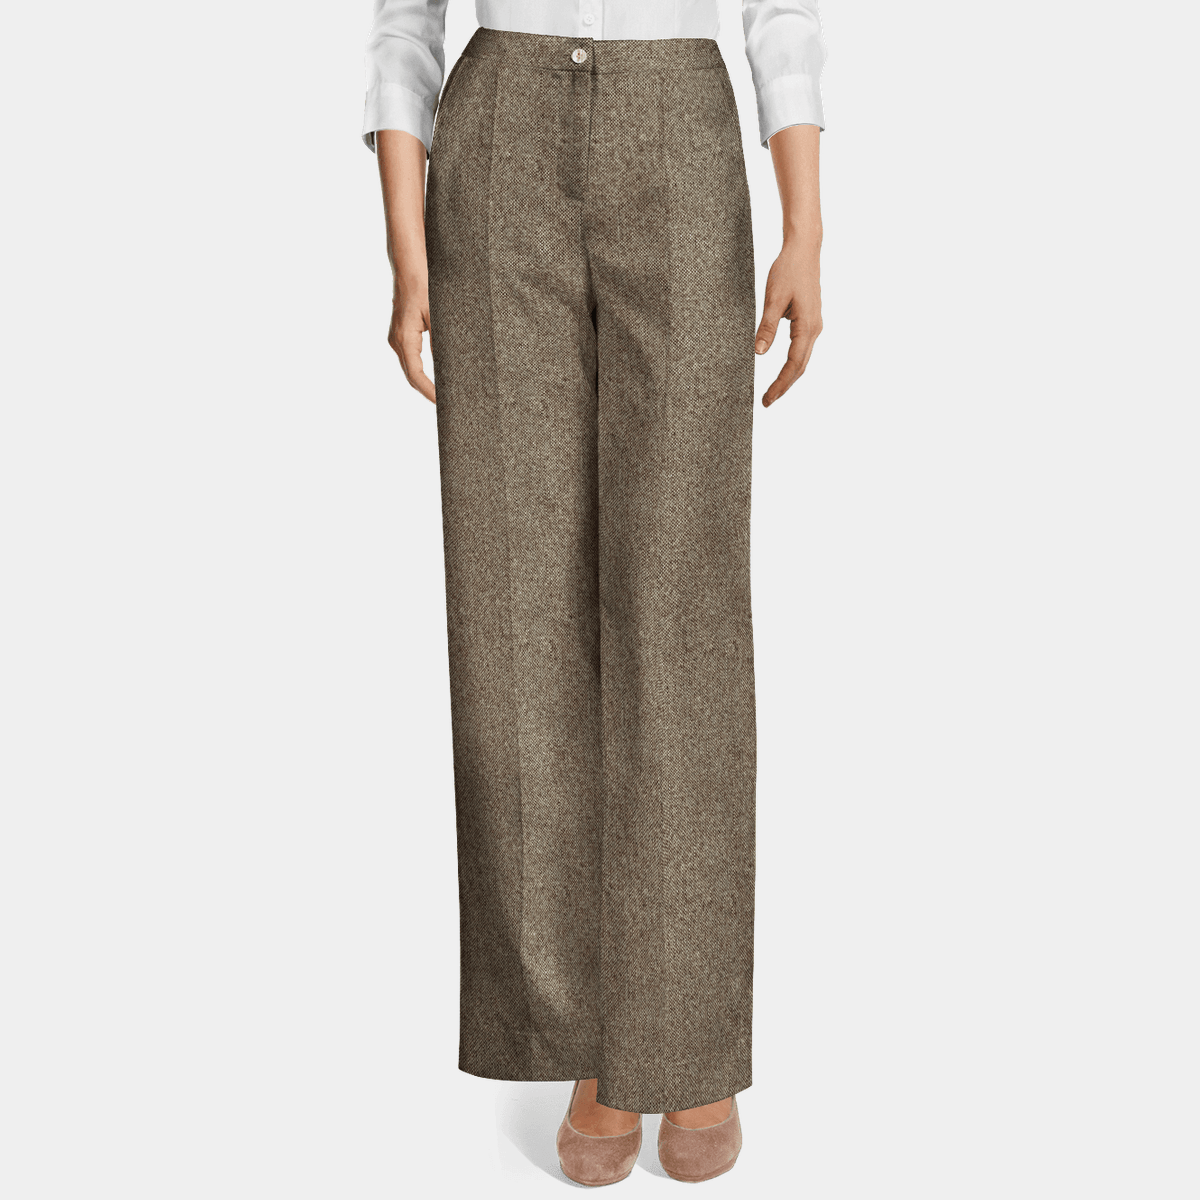 Comfy Glam High Waist Tweed Pants  Tweed pants, Women clothing boutique,  High waisted